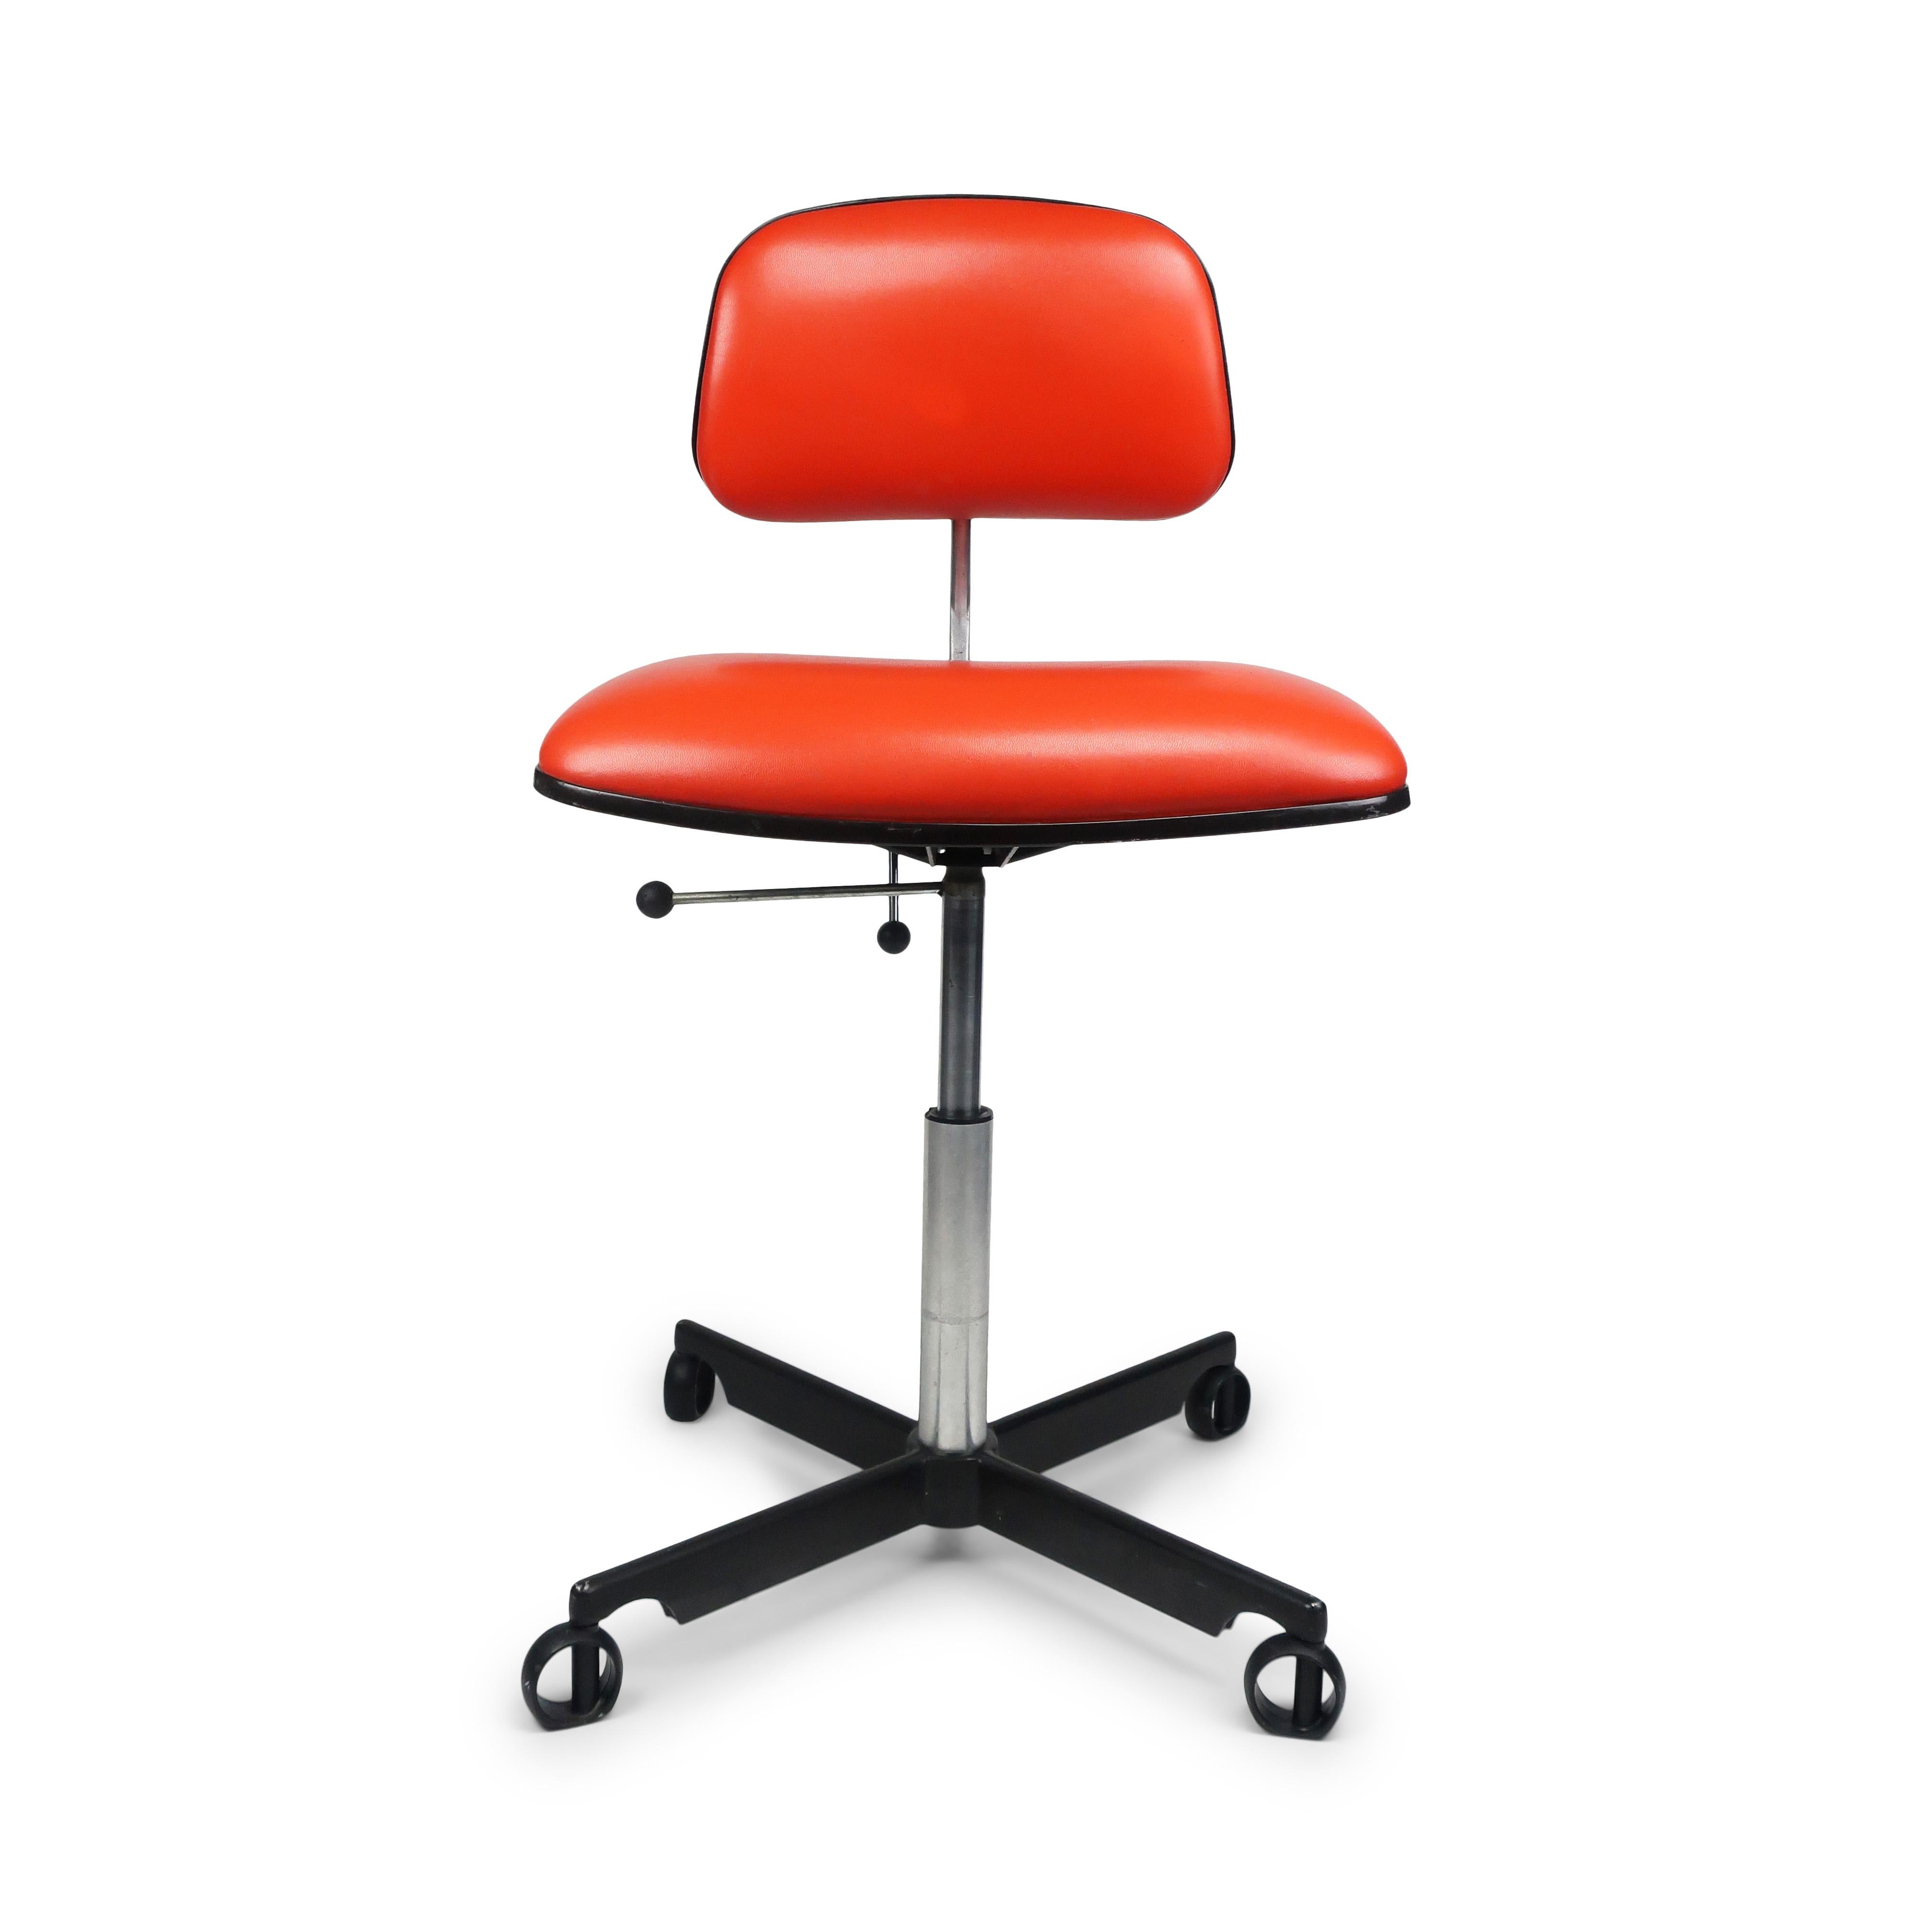 A great Kevi desk chair by Herman Miller with orange vinyl seat and back, black base, and polished aluminum stem. Includes seat height and back adjustment and rare non-rolling casters.

In very good vintage condition with wear consistent with age